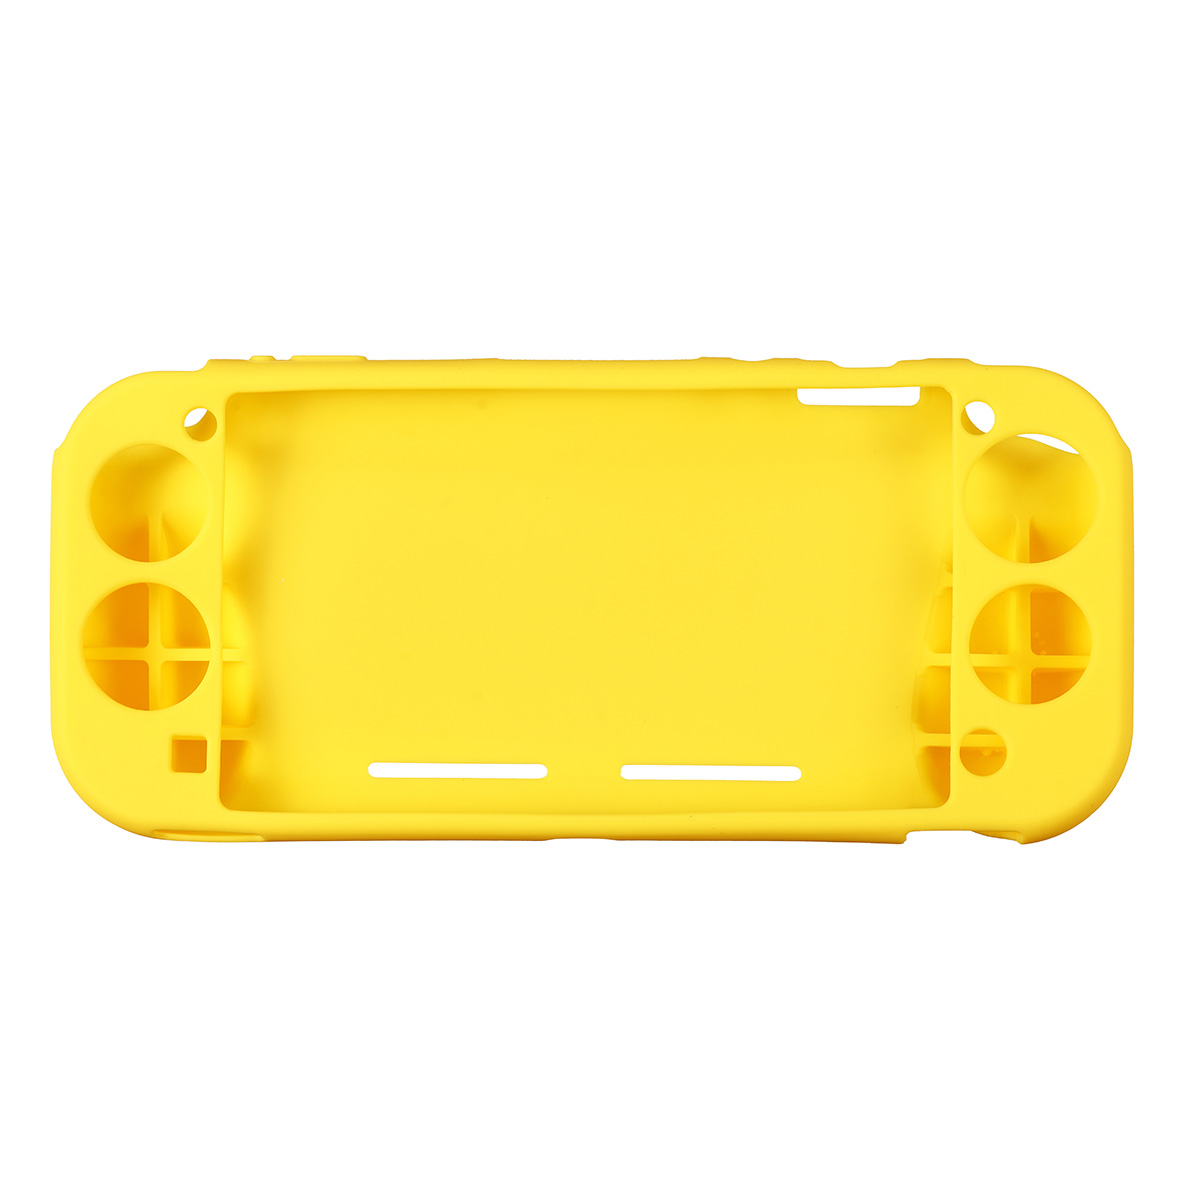 

Protective Cover Case Prevent Scratches Drop Protection for Nintendo Switch Lite Game Console